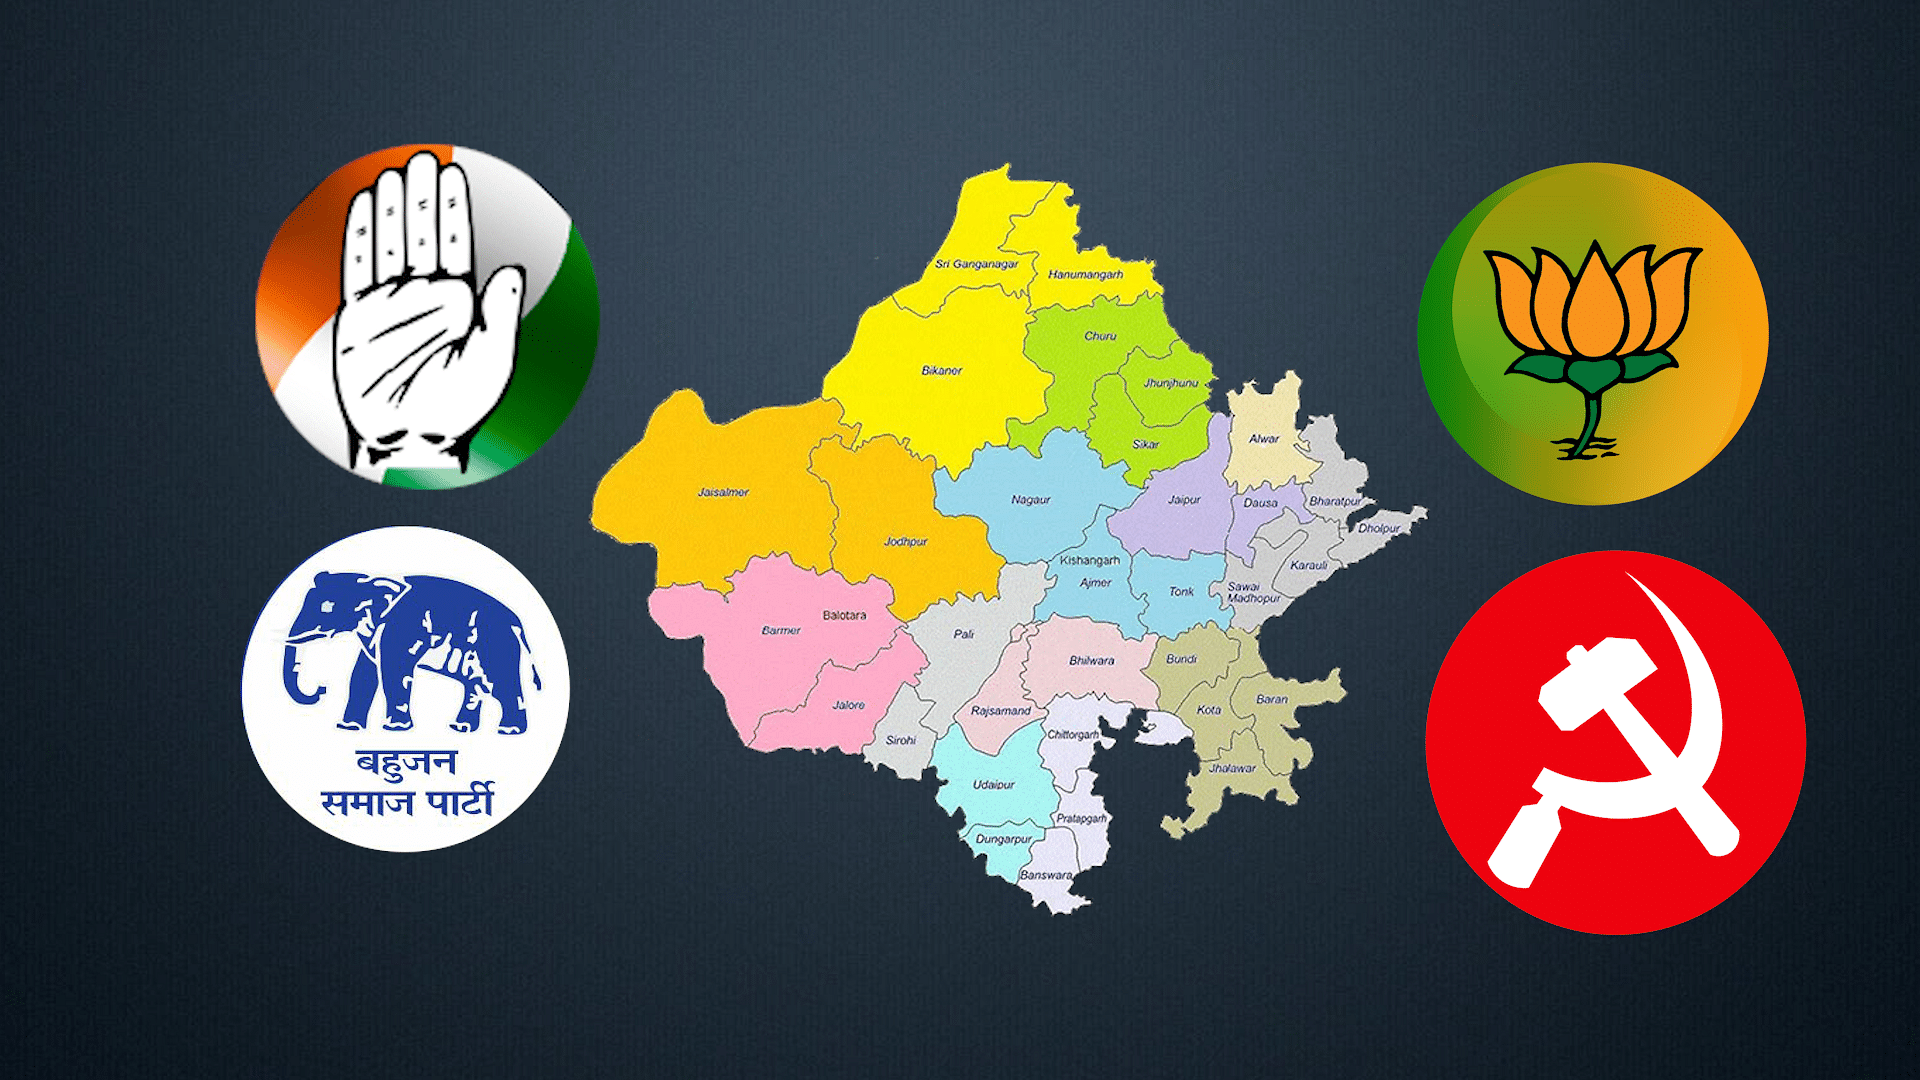 Elections for the 200-member Rajasthan Assembly are scheduled to held on Friday, November 7